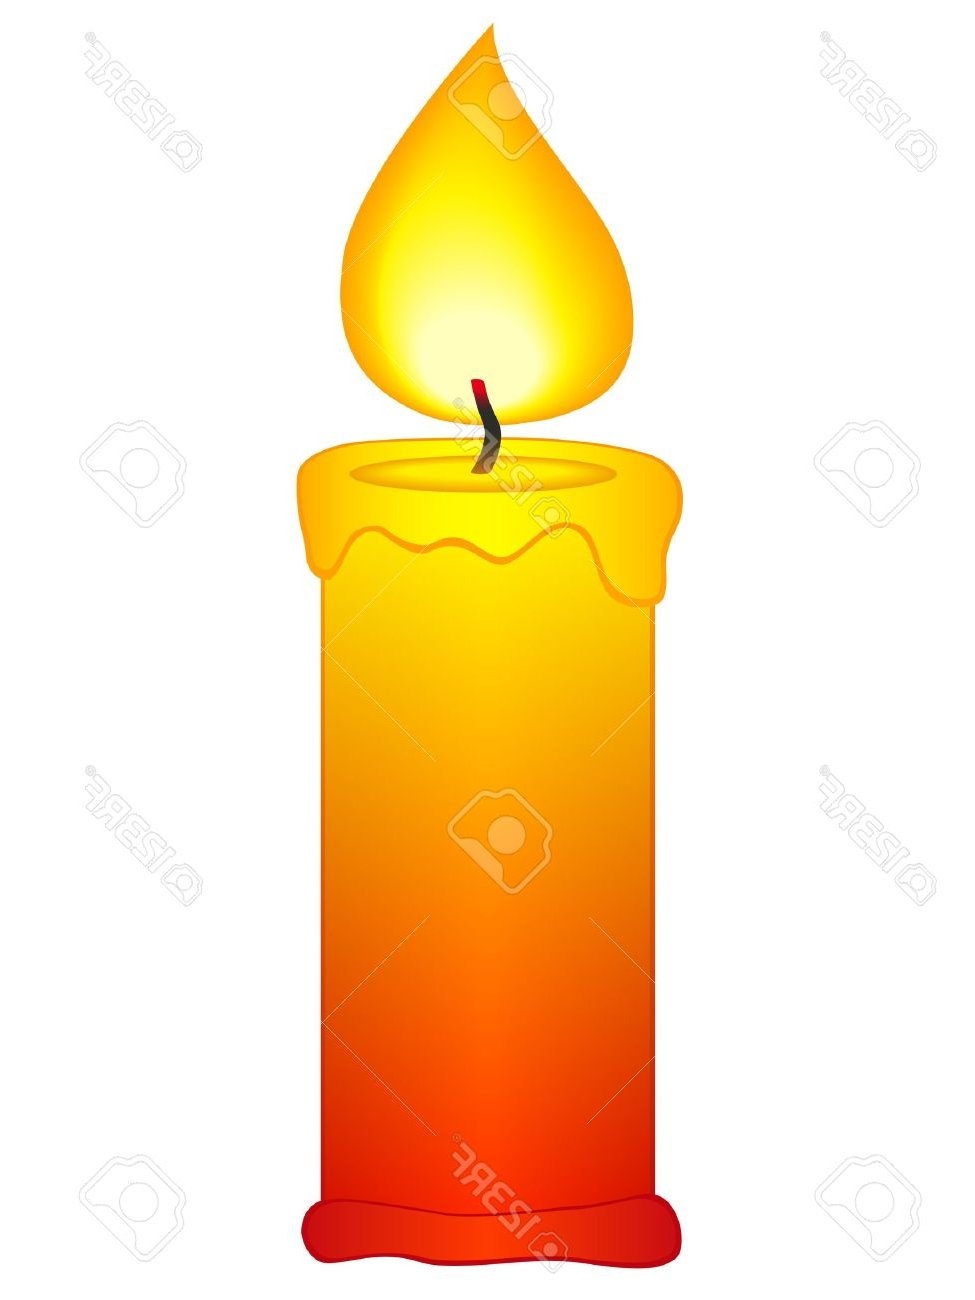 Best of gallery digital. Candles clipart candle flame